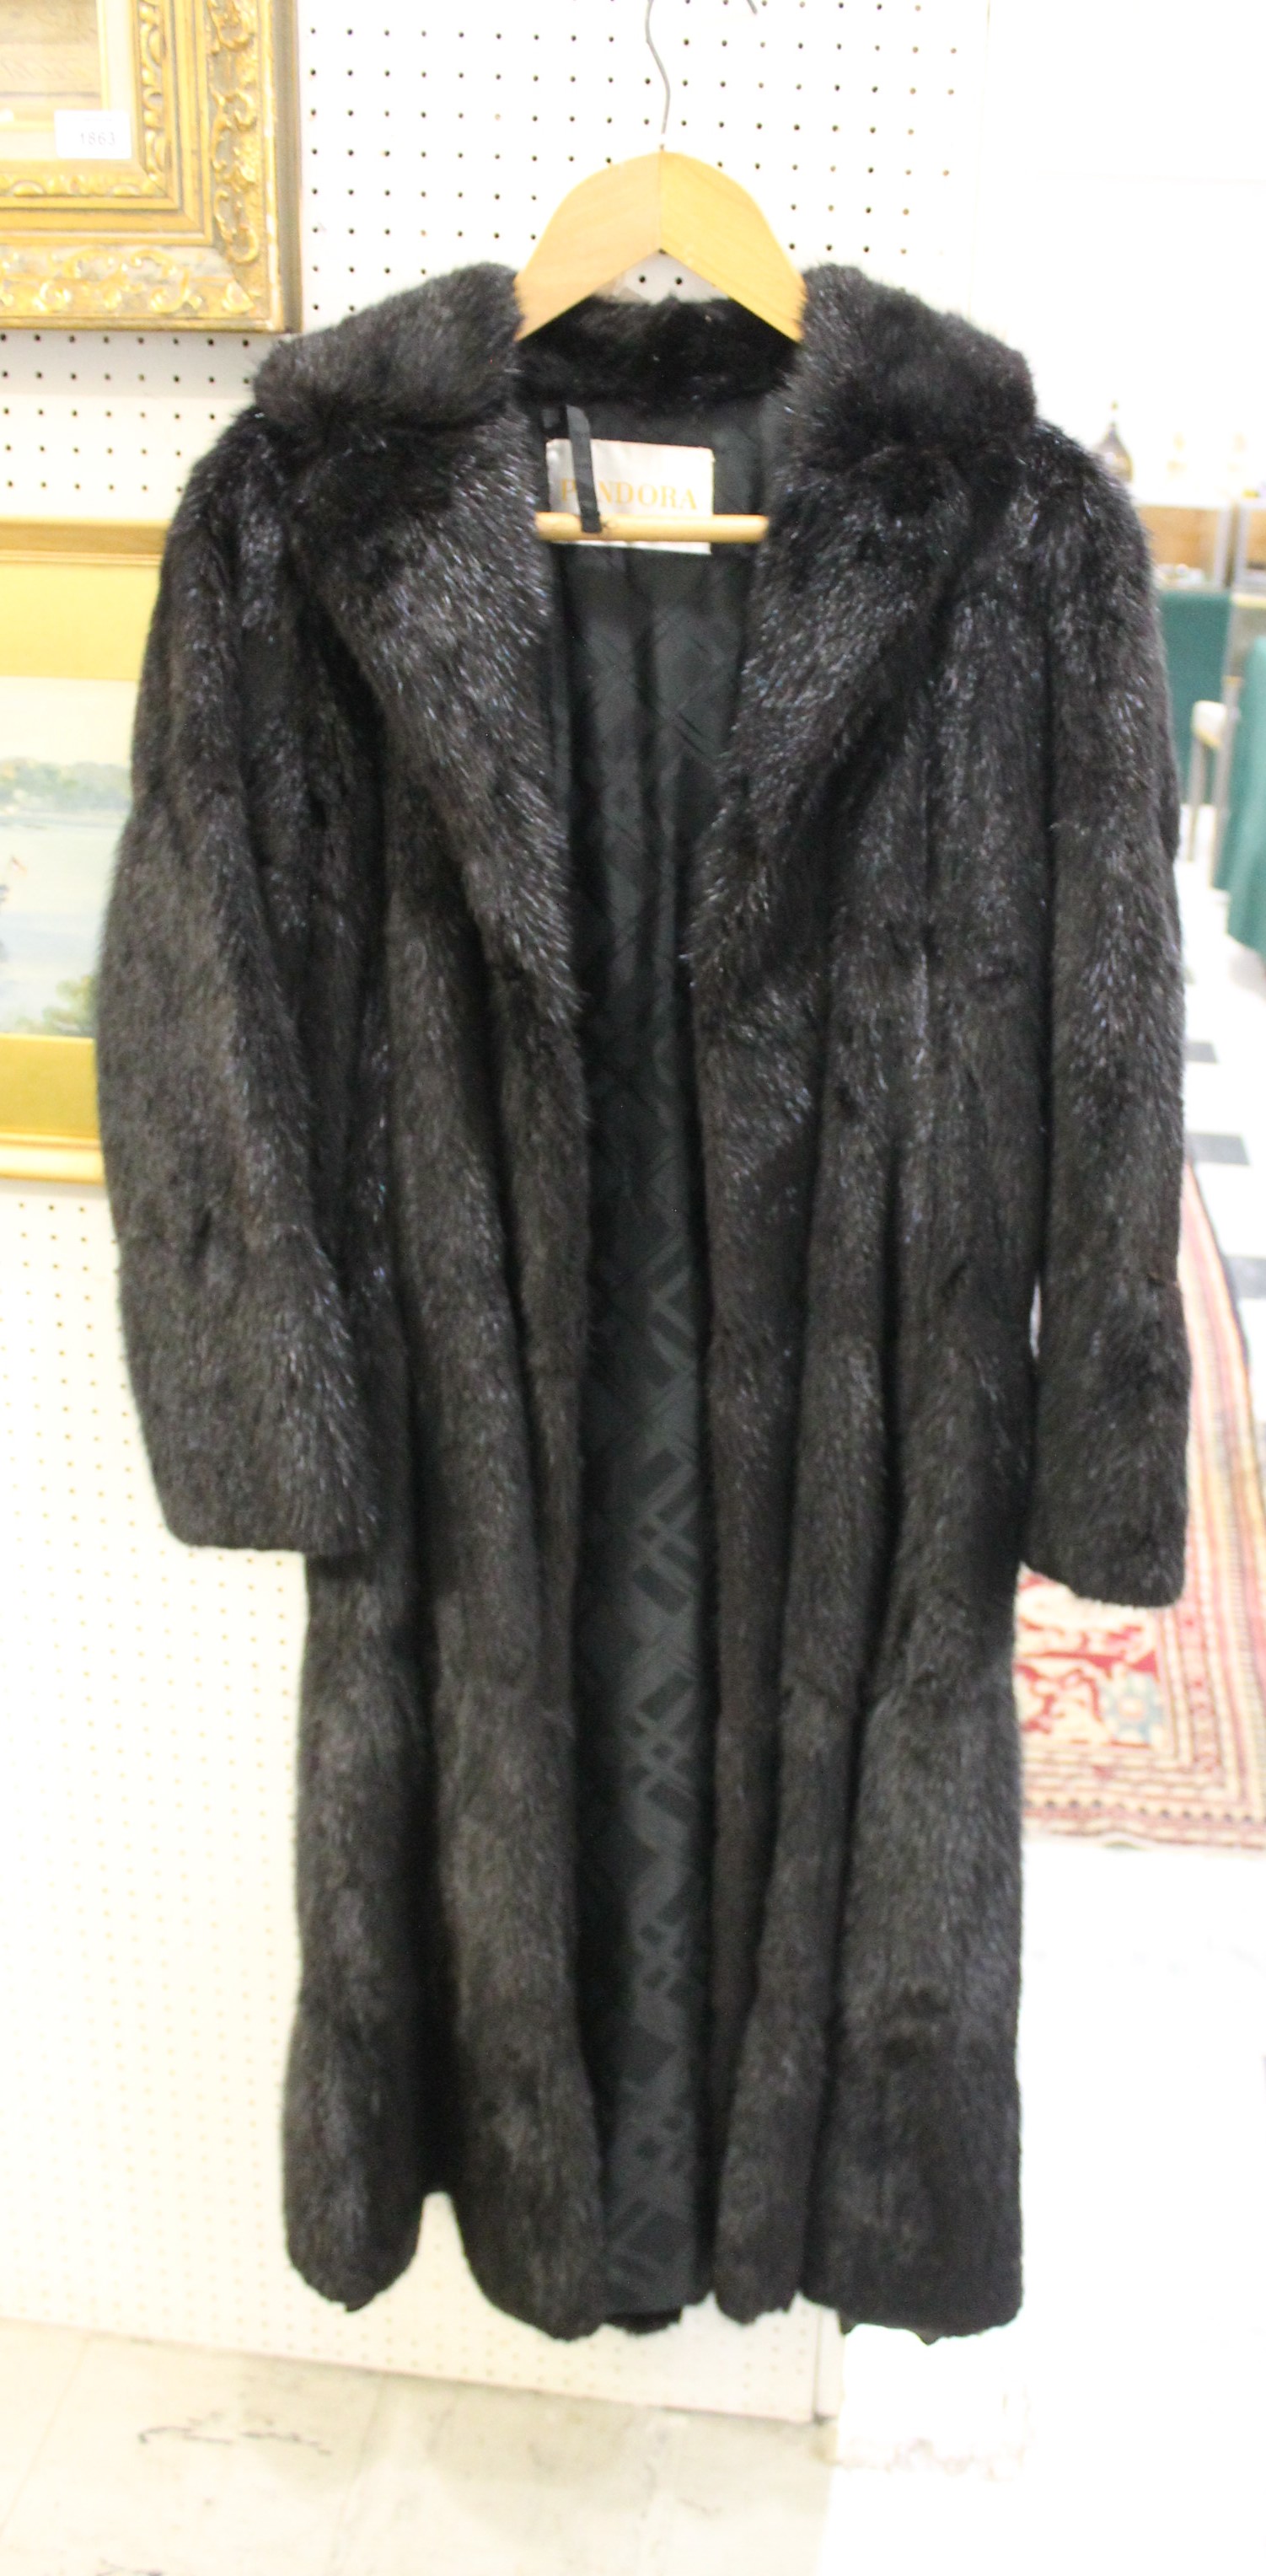 FUR COAT a full length soft styled black fur coat, fully lined with pockets and with a label for